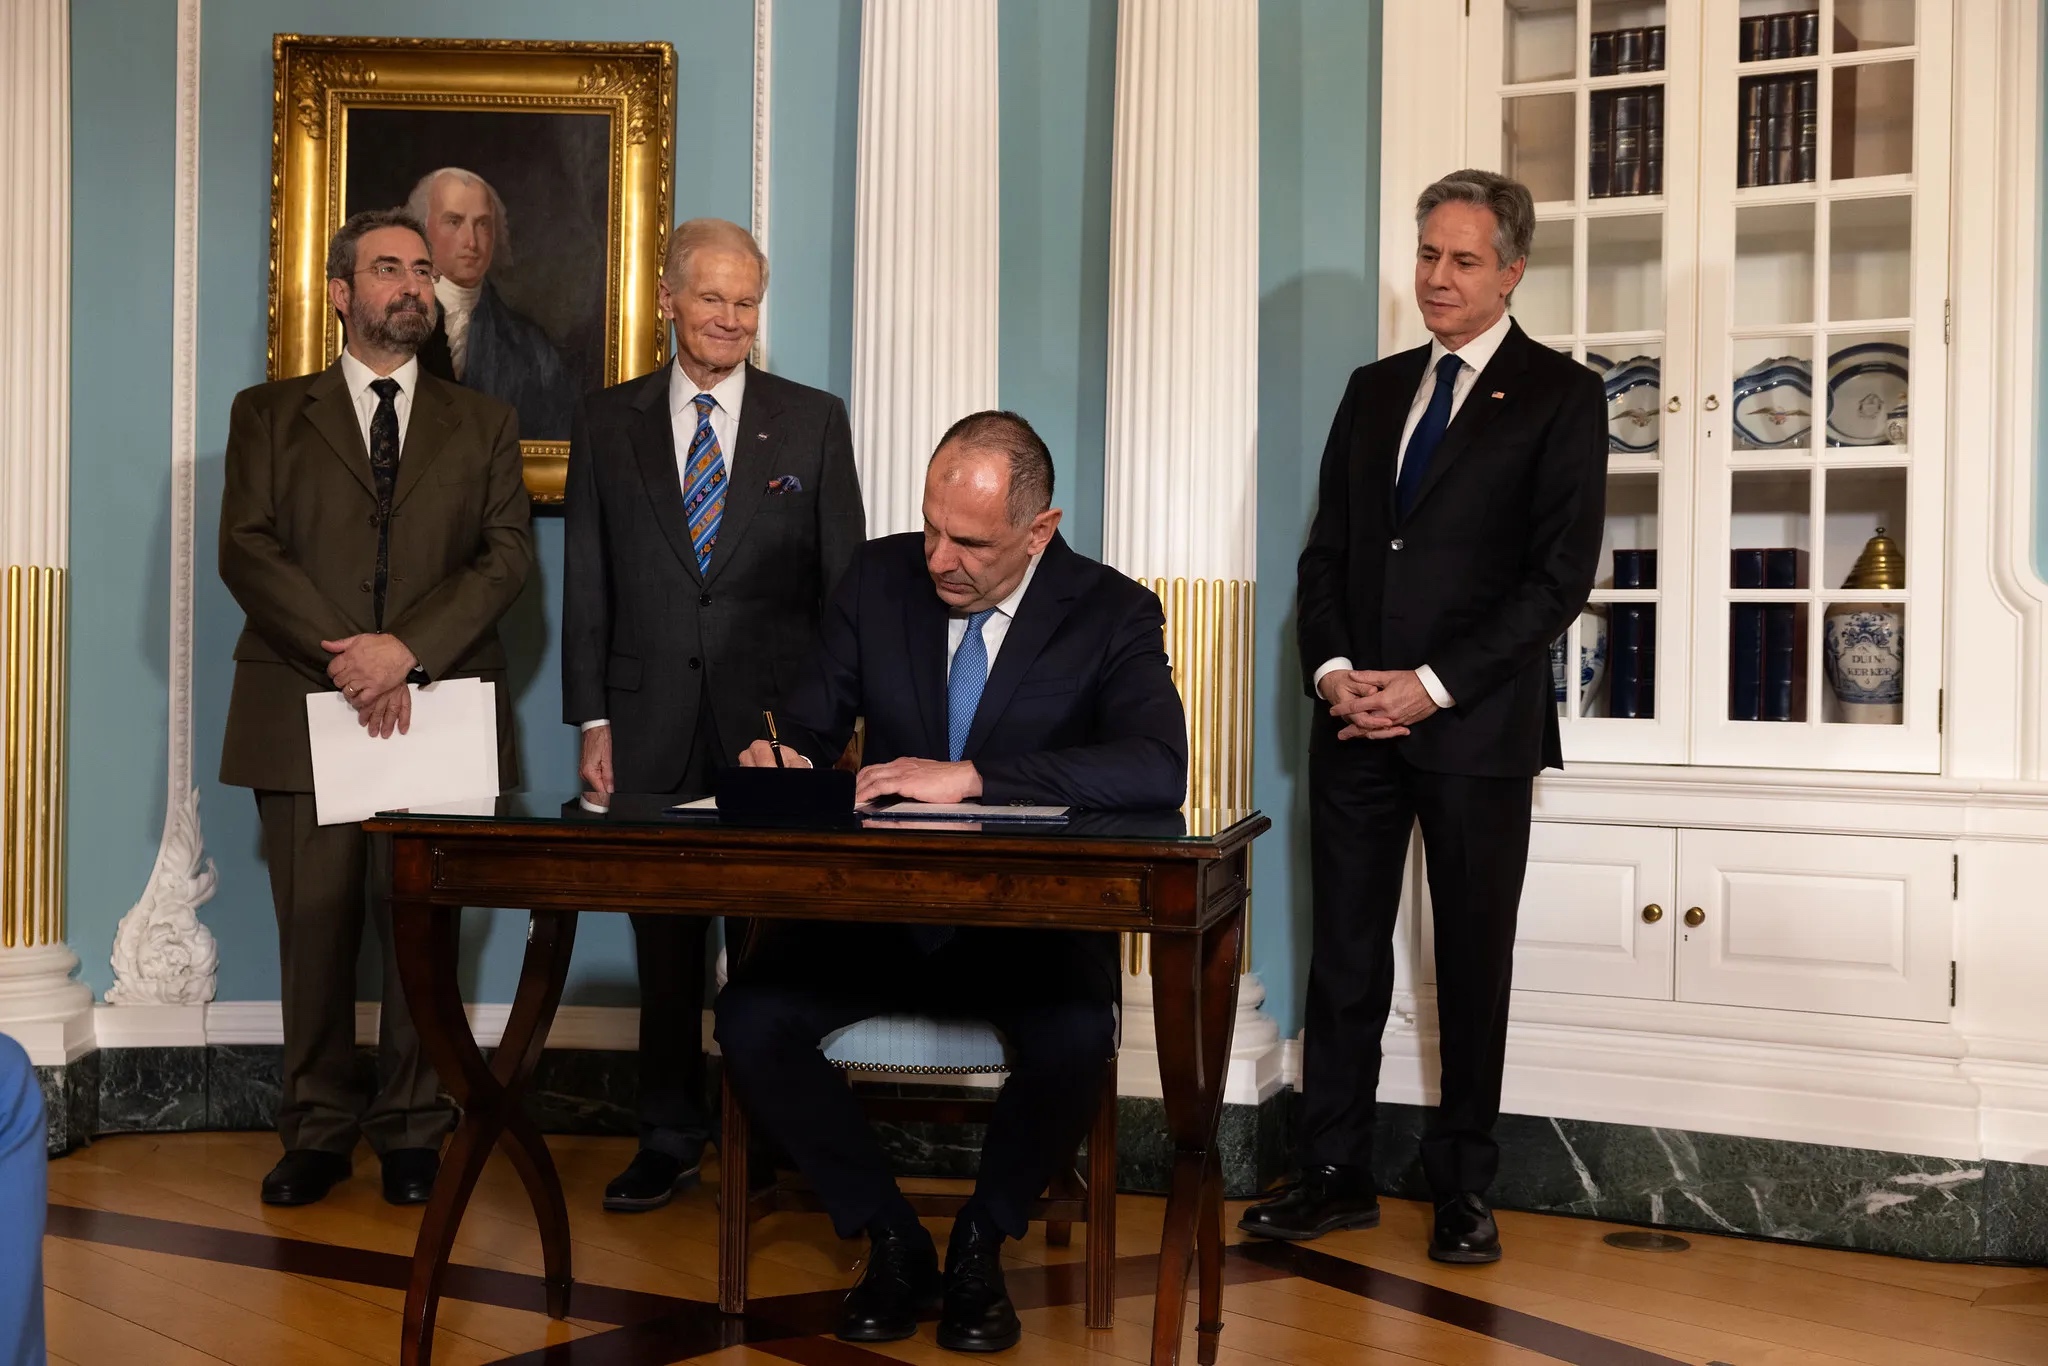 MOUNTAIN VIEW, Calif. — Greece became the latest country to sign the Artemis Accords outlining best practices for sustainable space exploration Feb.